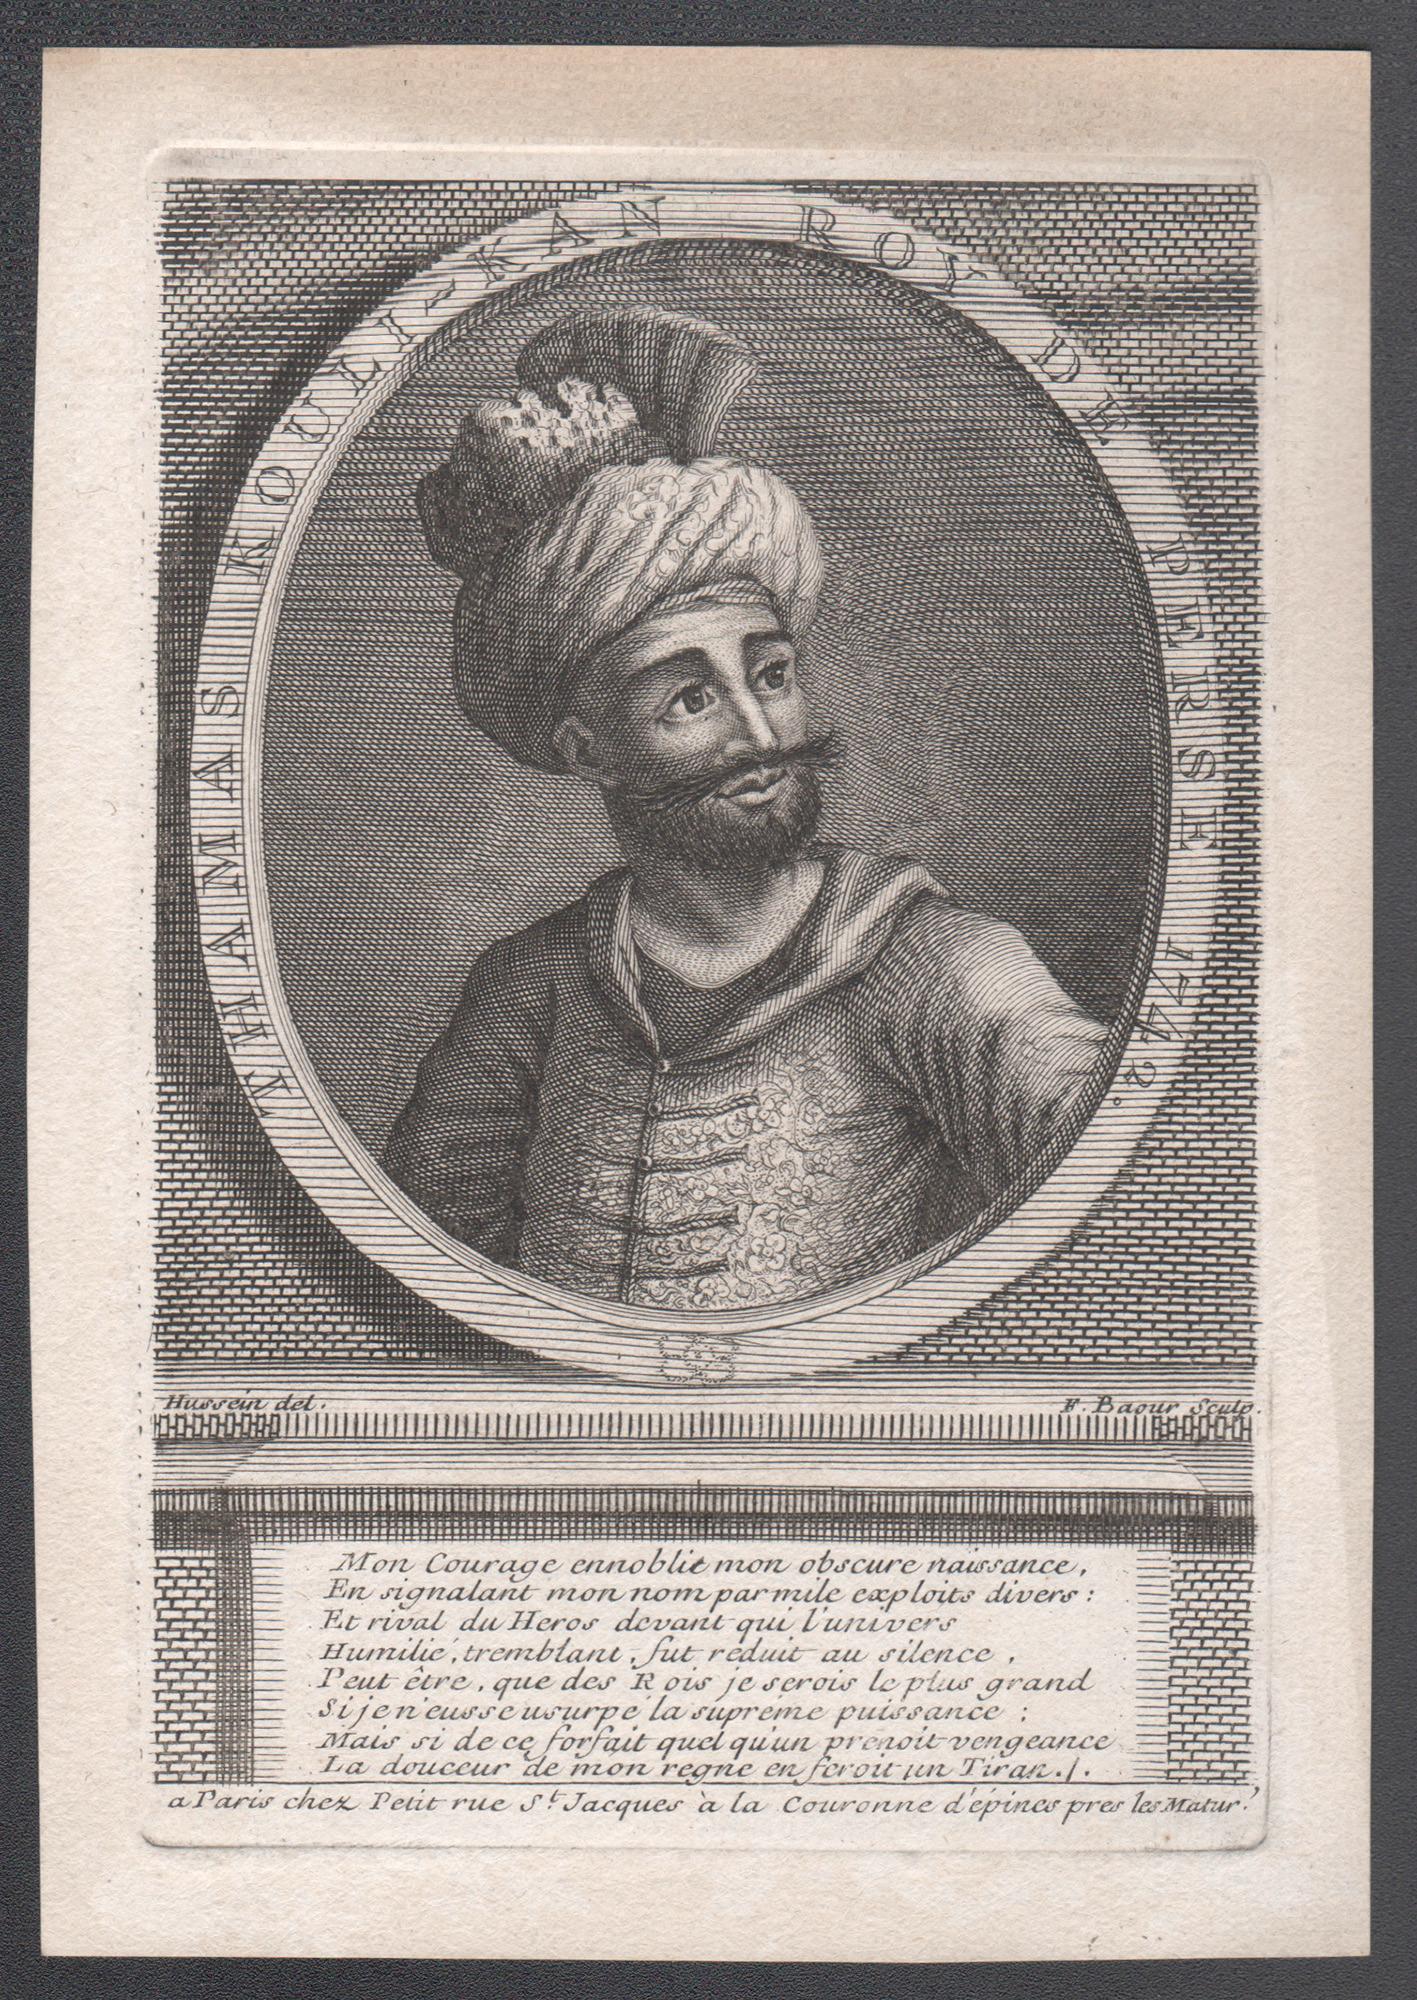 Thamas Kouli-Kan, Roy de Perse, 1742 (Nader Shah), portrait engraving, 1742 - Print by F Baour after Hussain